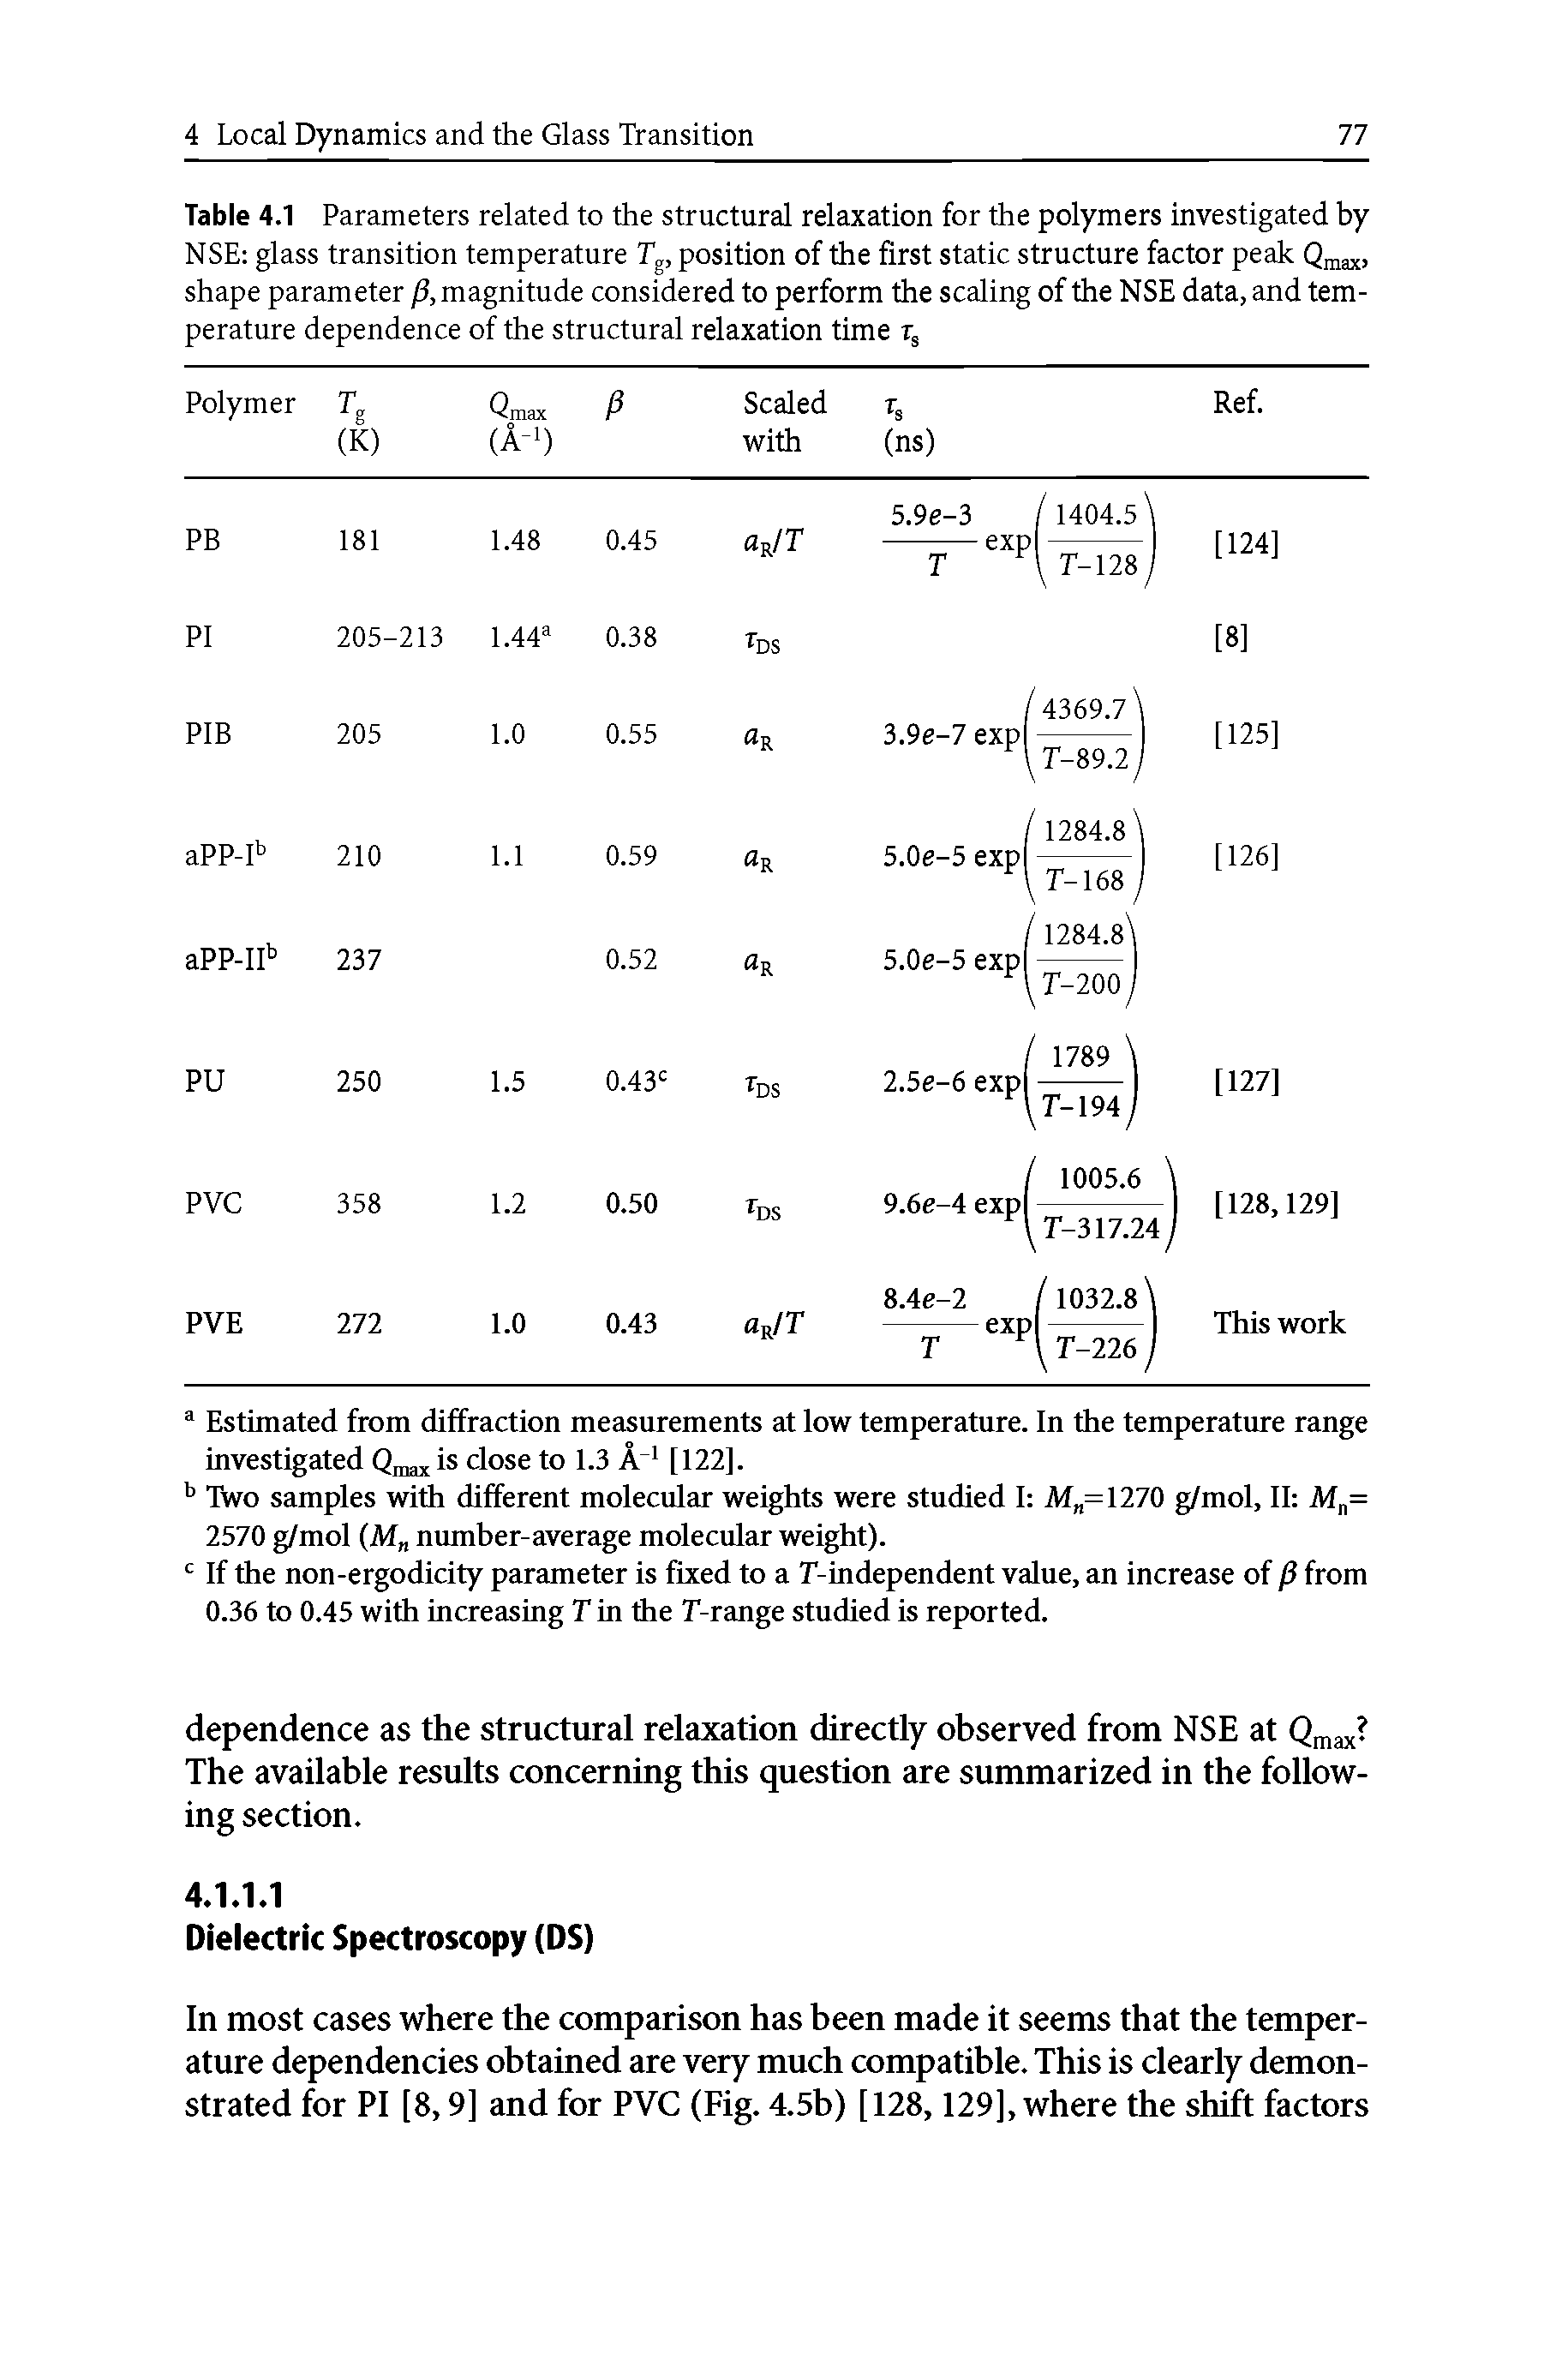 Table 4.1 Parameters related to the structural relaxation for the polymers investigated by NSE glass transition temperature Tg, position of the first static structure factor peak Qmax> shape parameter magnitude considered to perform the scaling of the NSE data, and temperature dependence of the structural relaxation time...